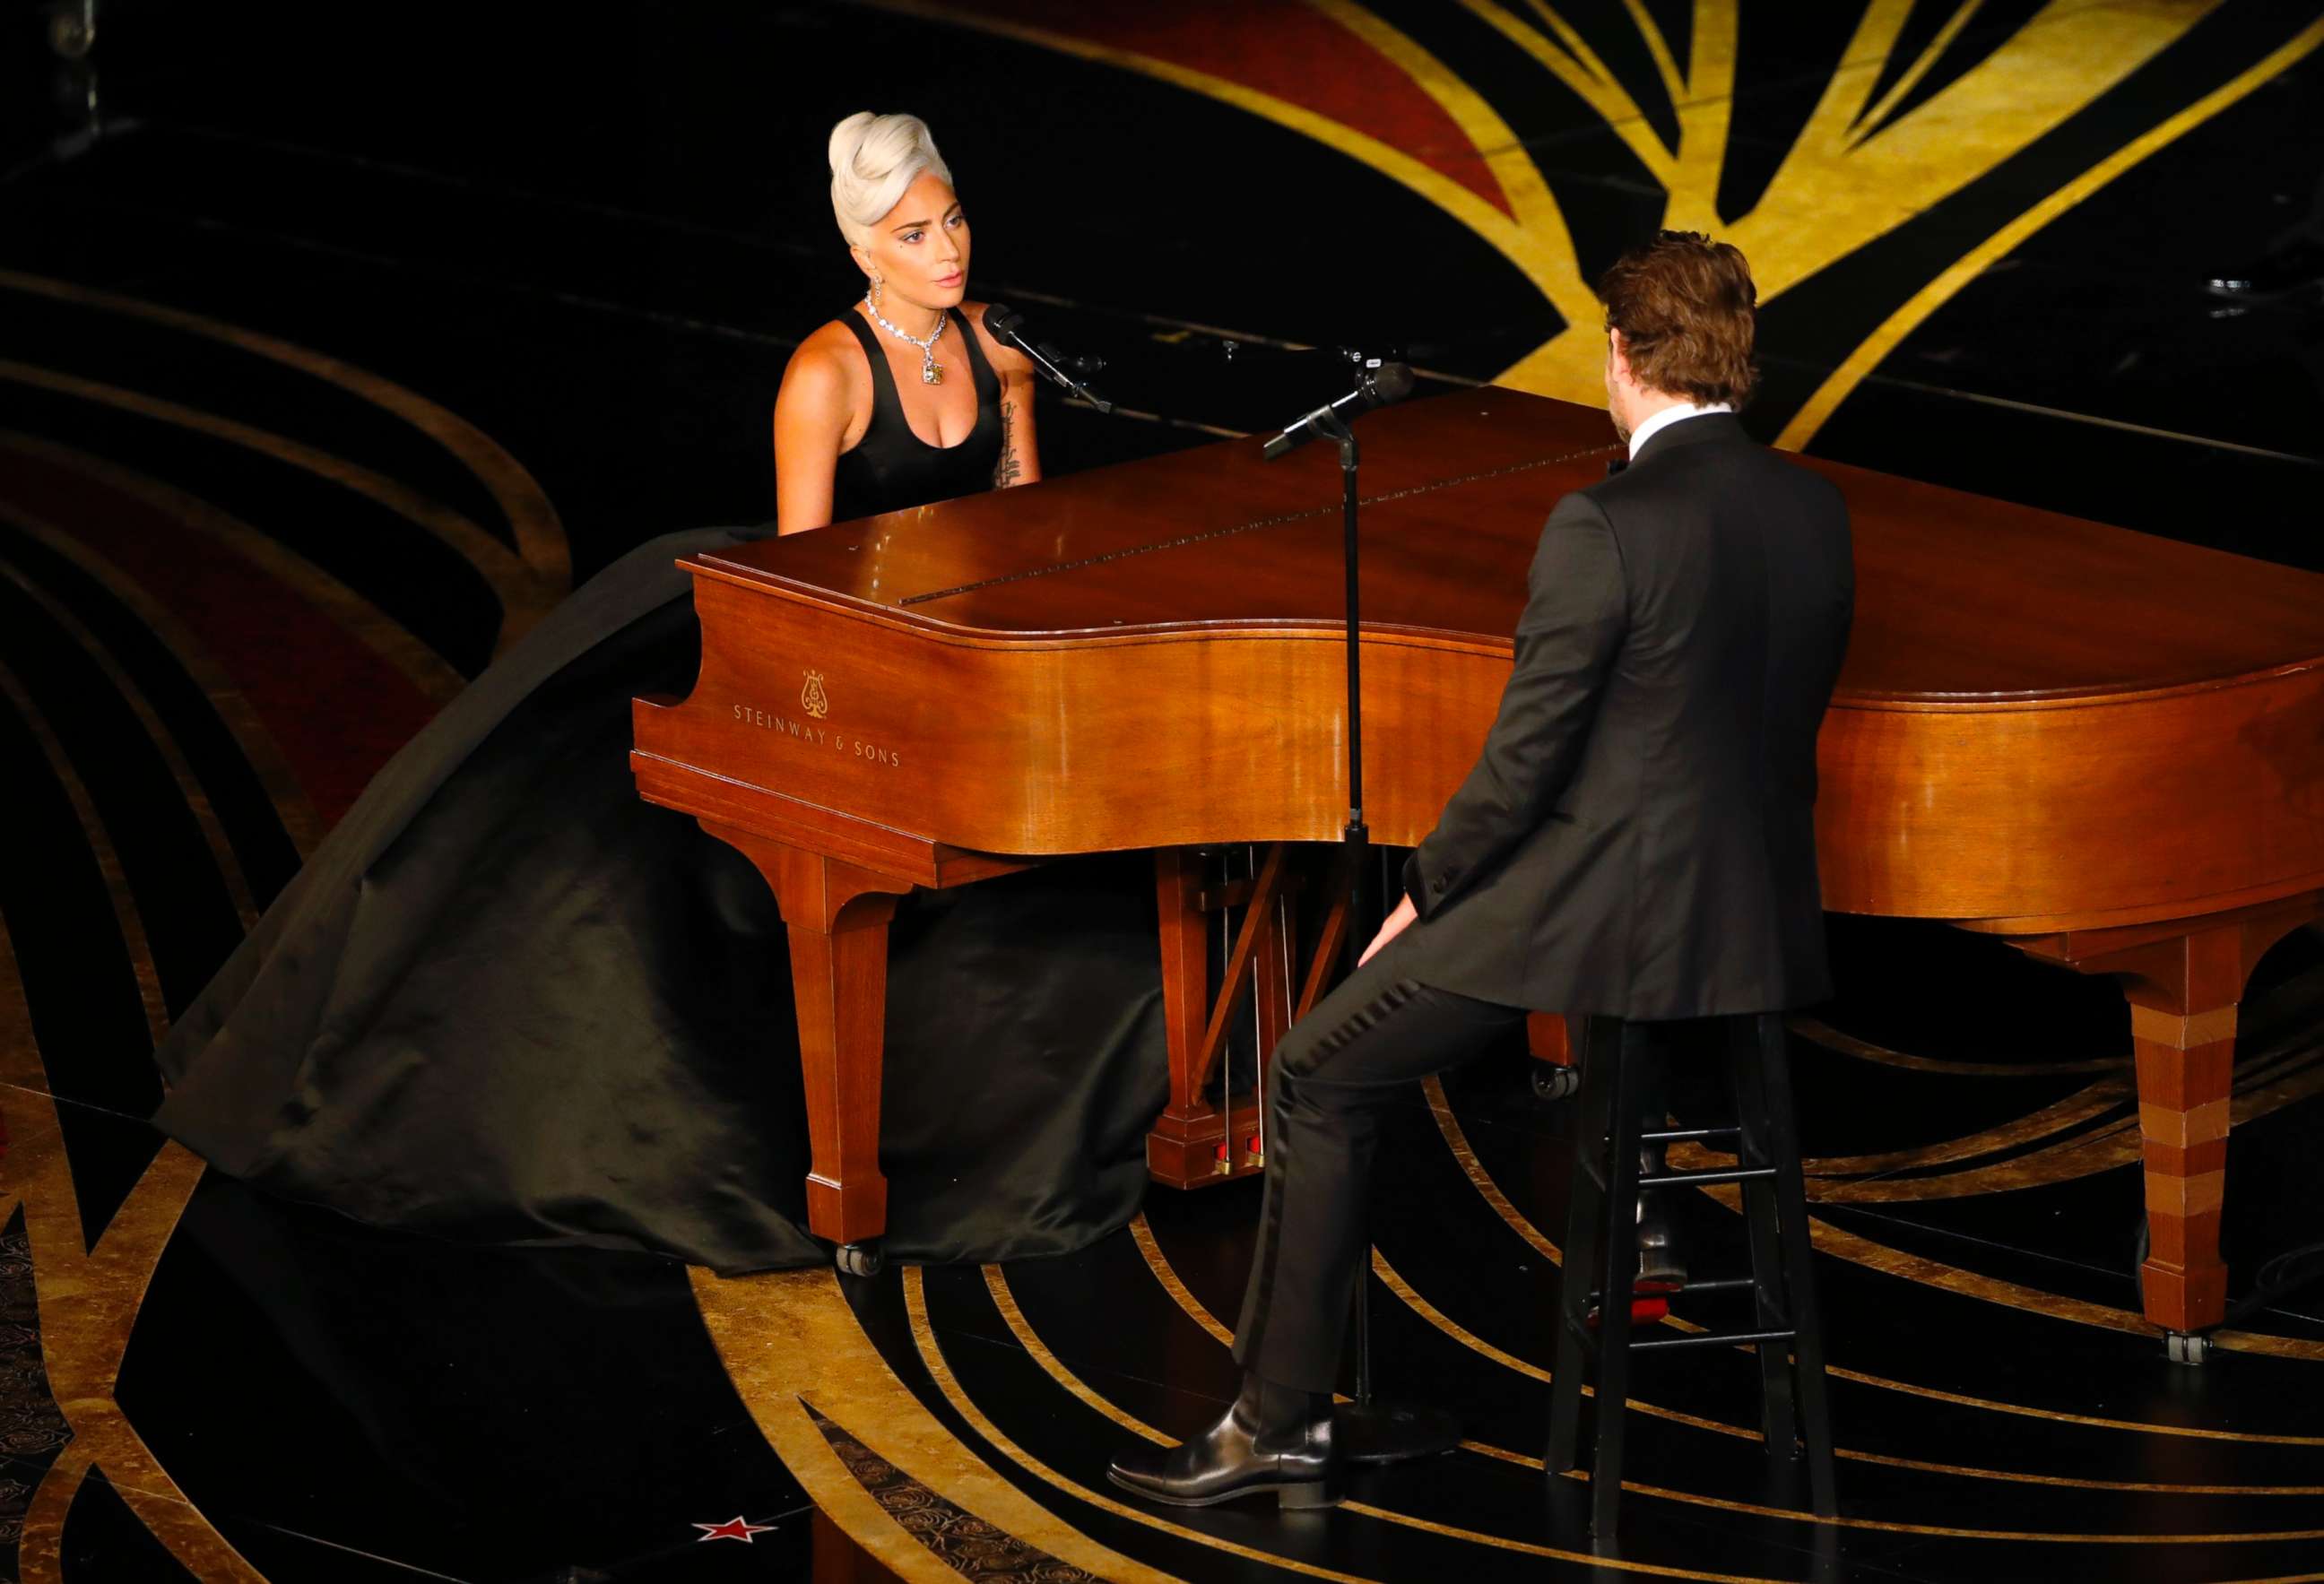 PHOTO: Lady Gaga and Bradley Cooper perform "Shallow" from "A Star Is Born" at the 91st Academy Awards in Los Angeles, Feb. 24, 2019.